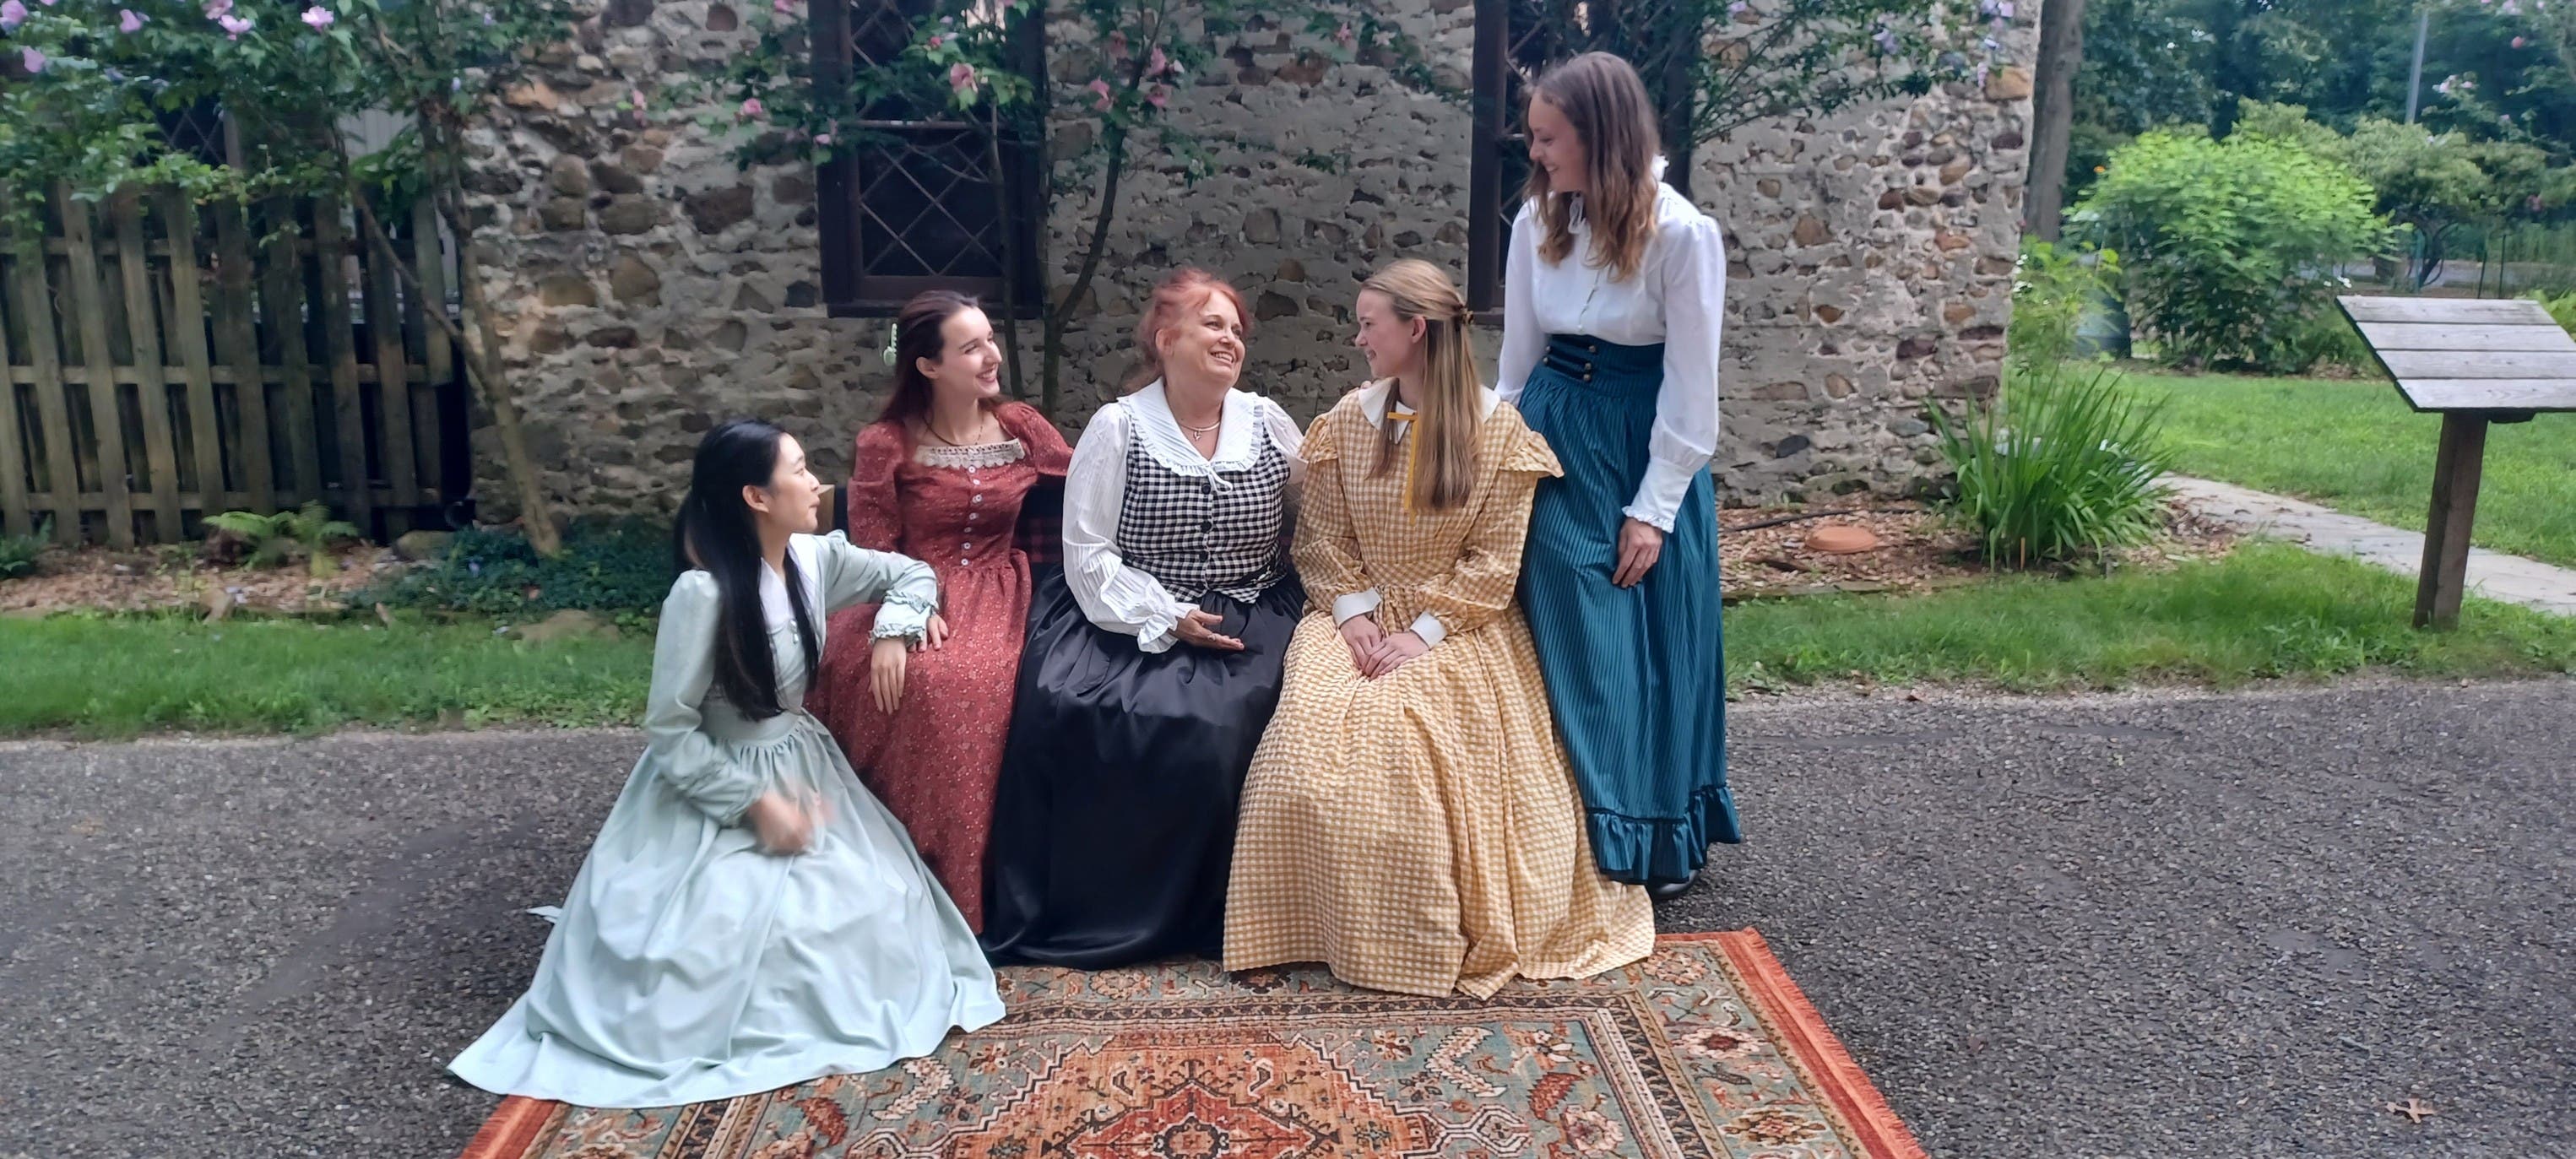 "Little Women" at the Hermitage